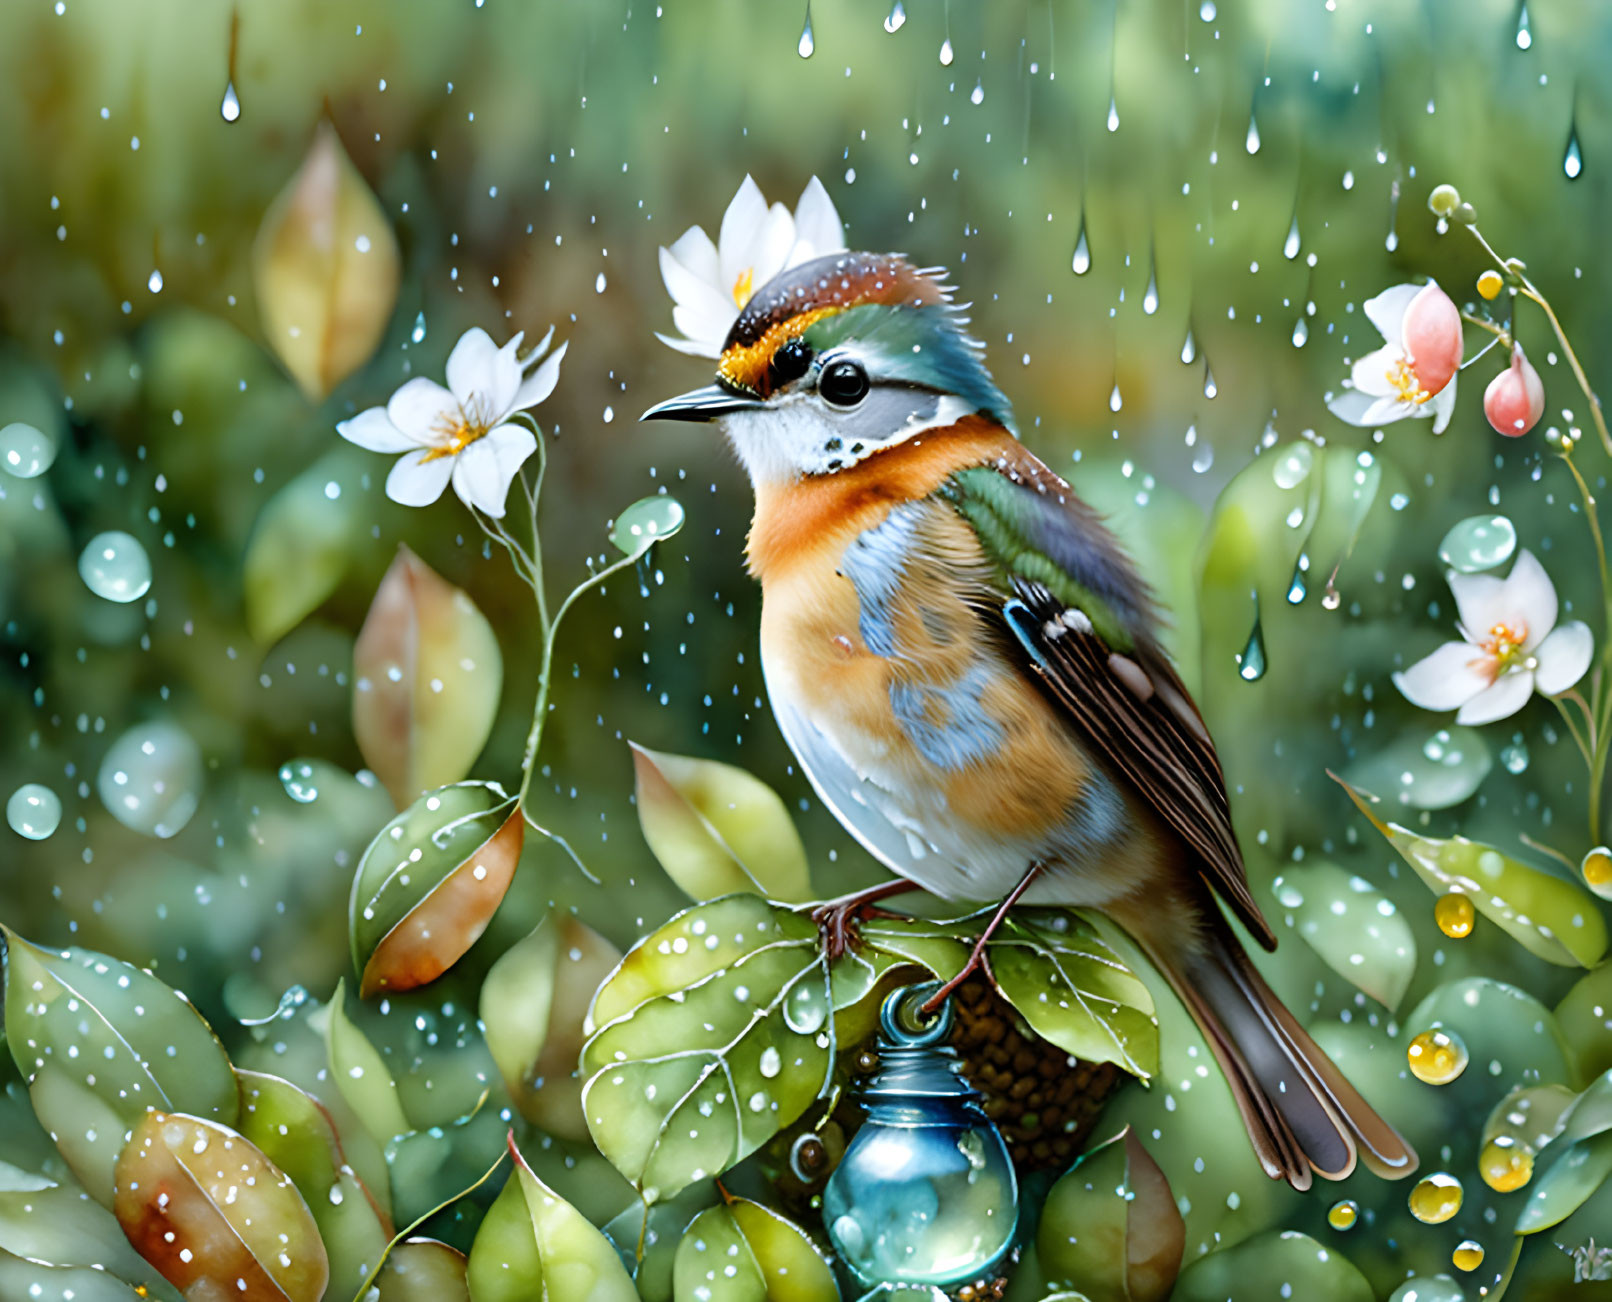 Colorful Bird with White Flower on Head Perched on Green Bulb with Raindrops and Flowers